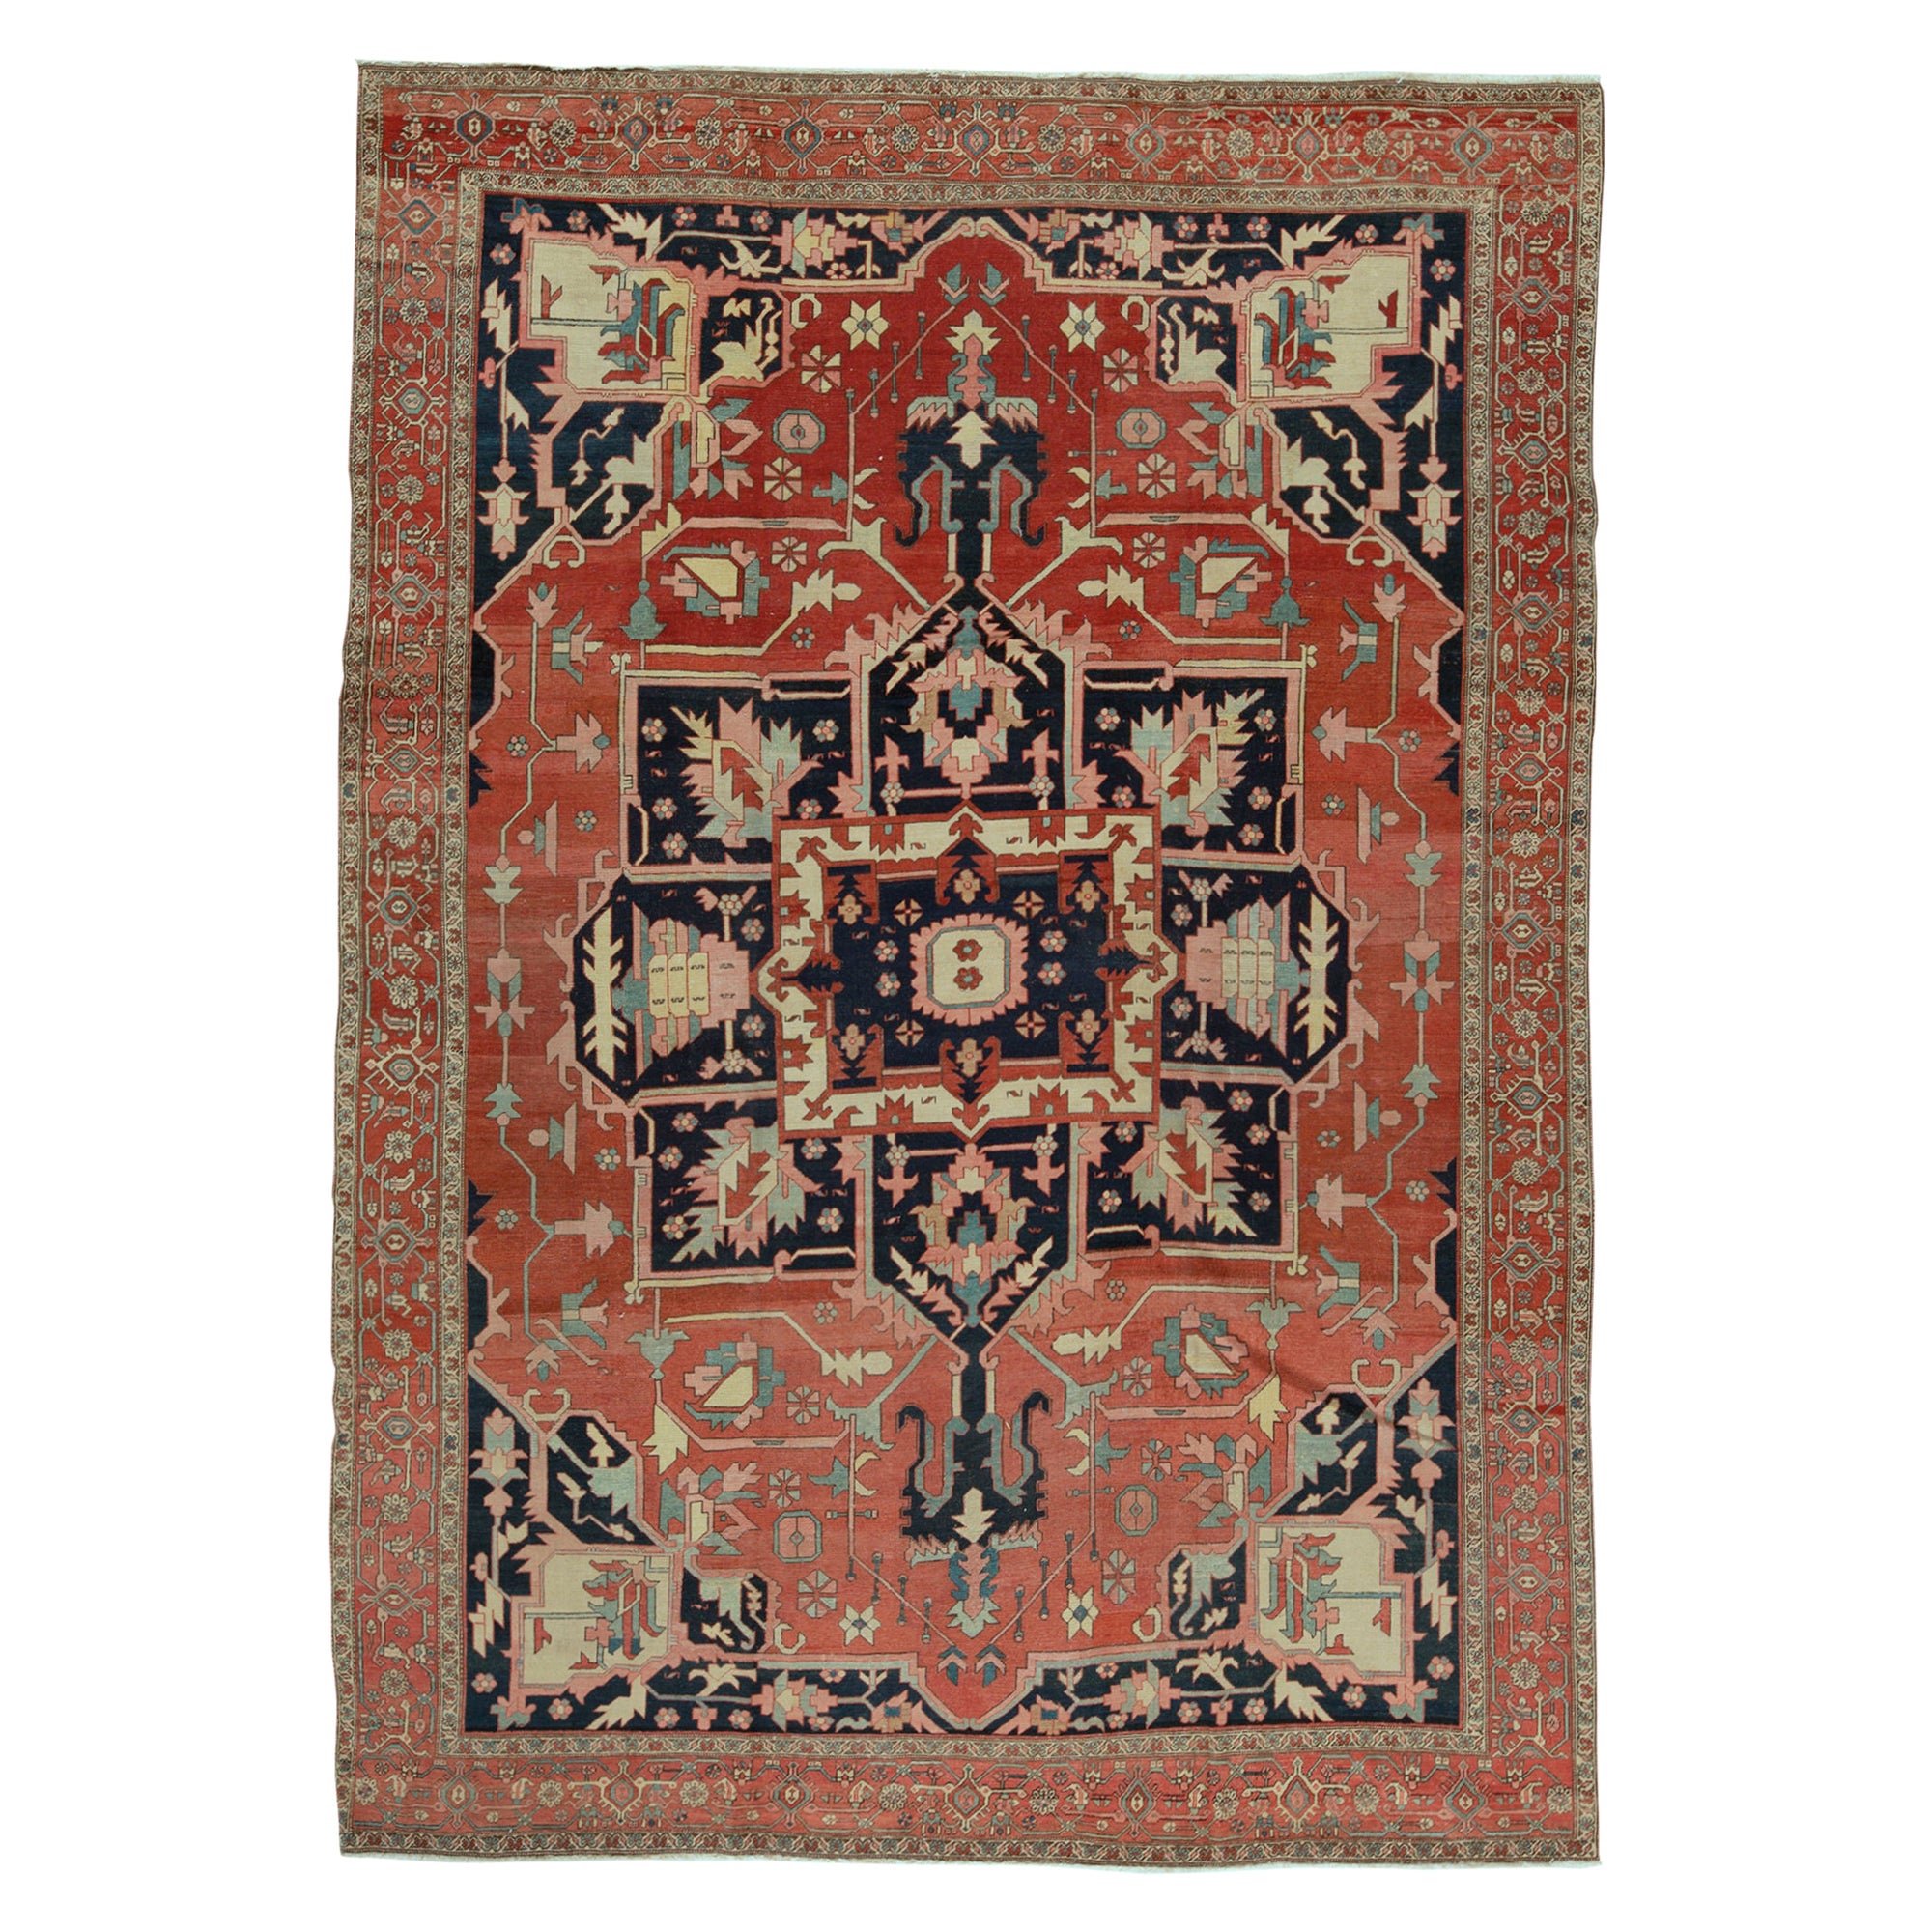   Antique Persian Fine Traditional Handwoven Luxury Wool Red Rug